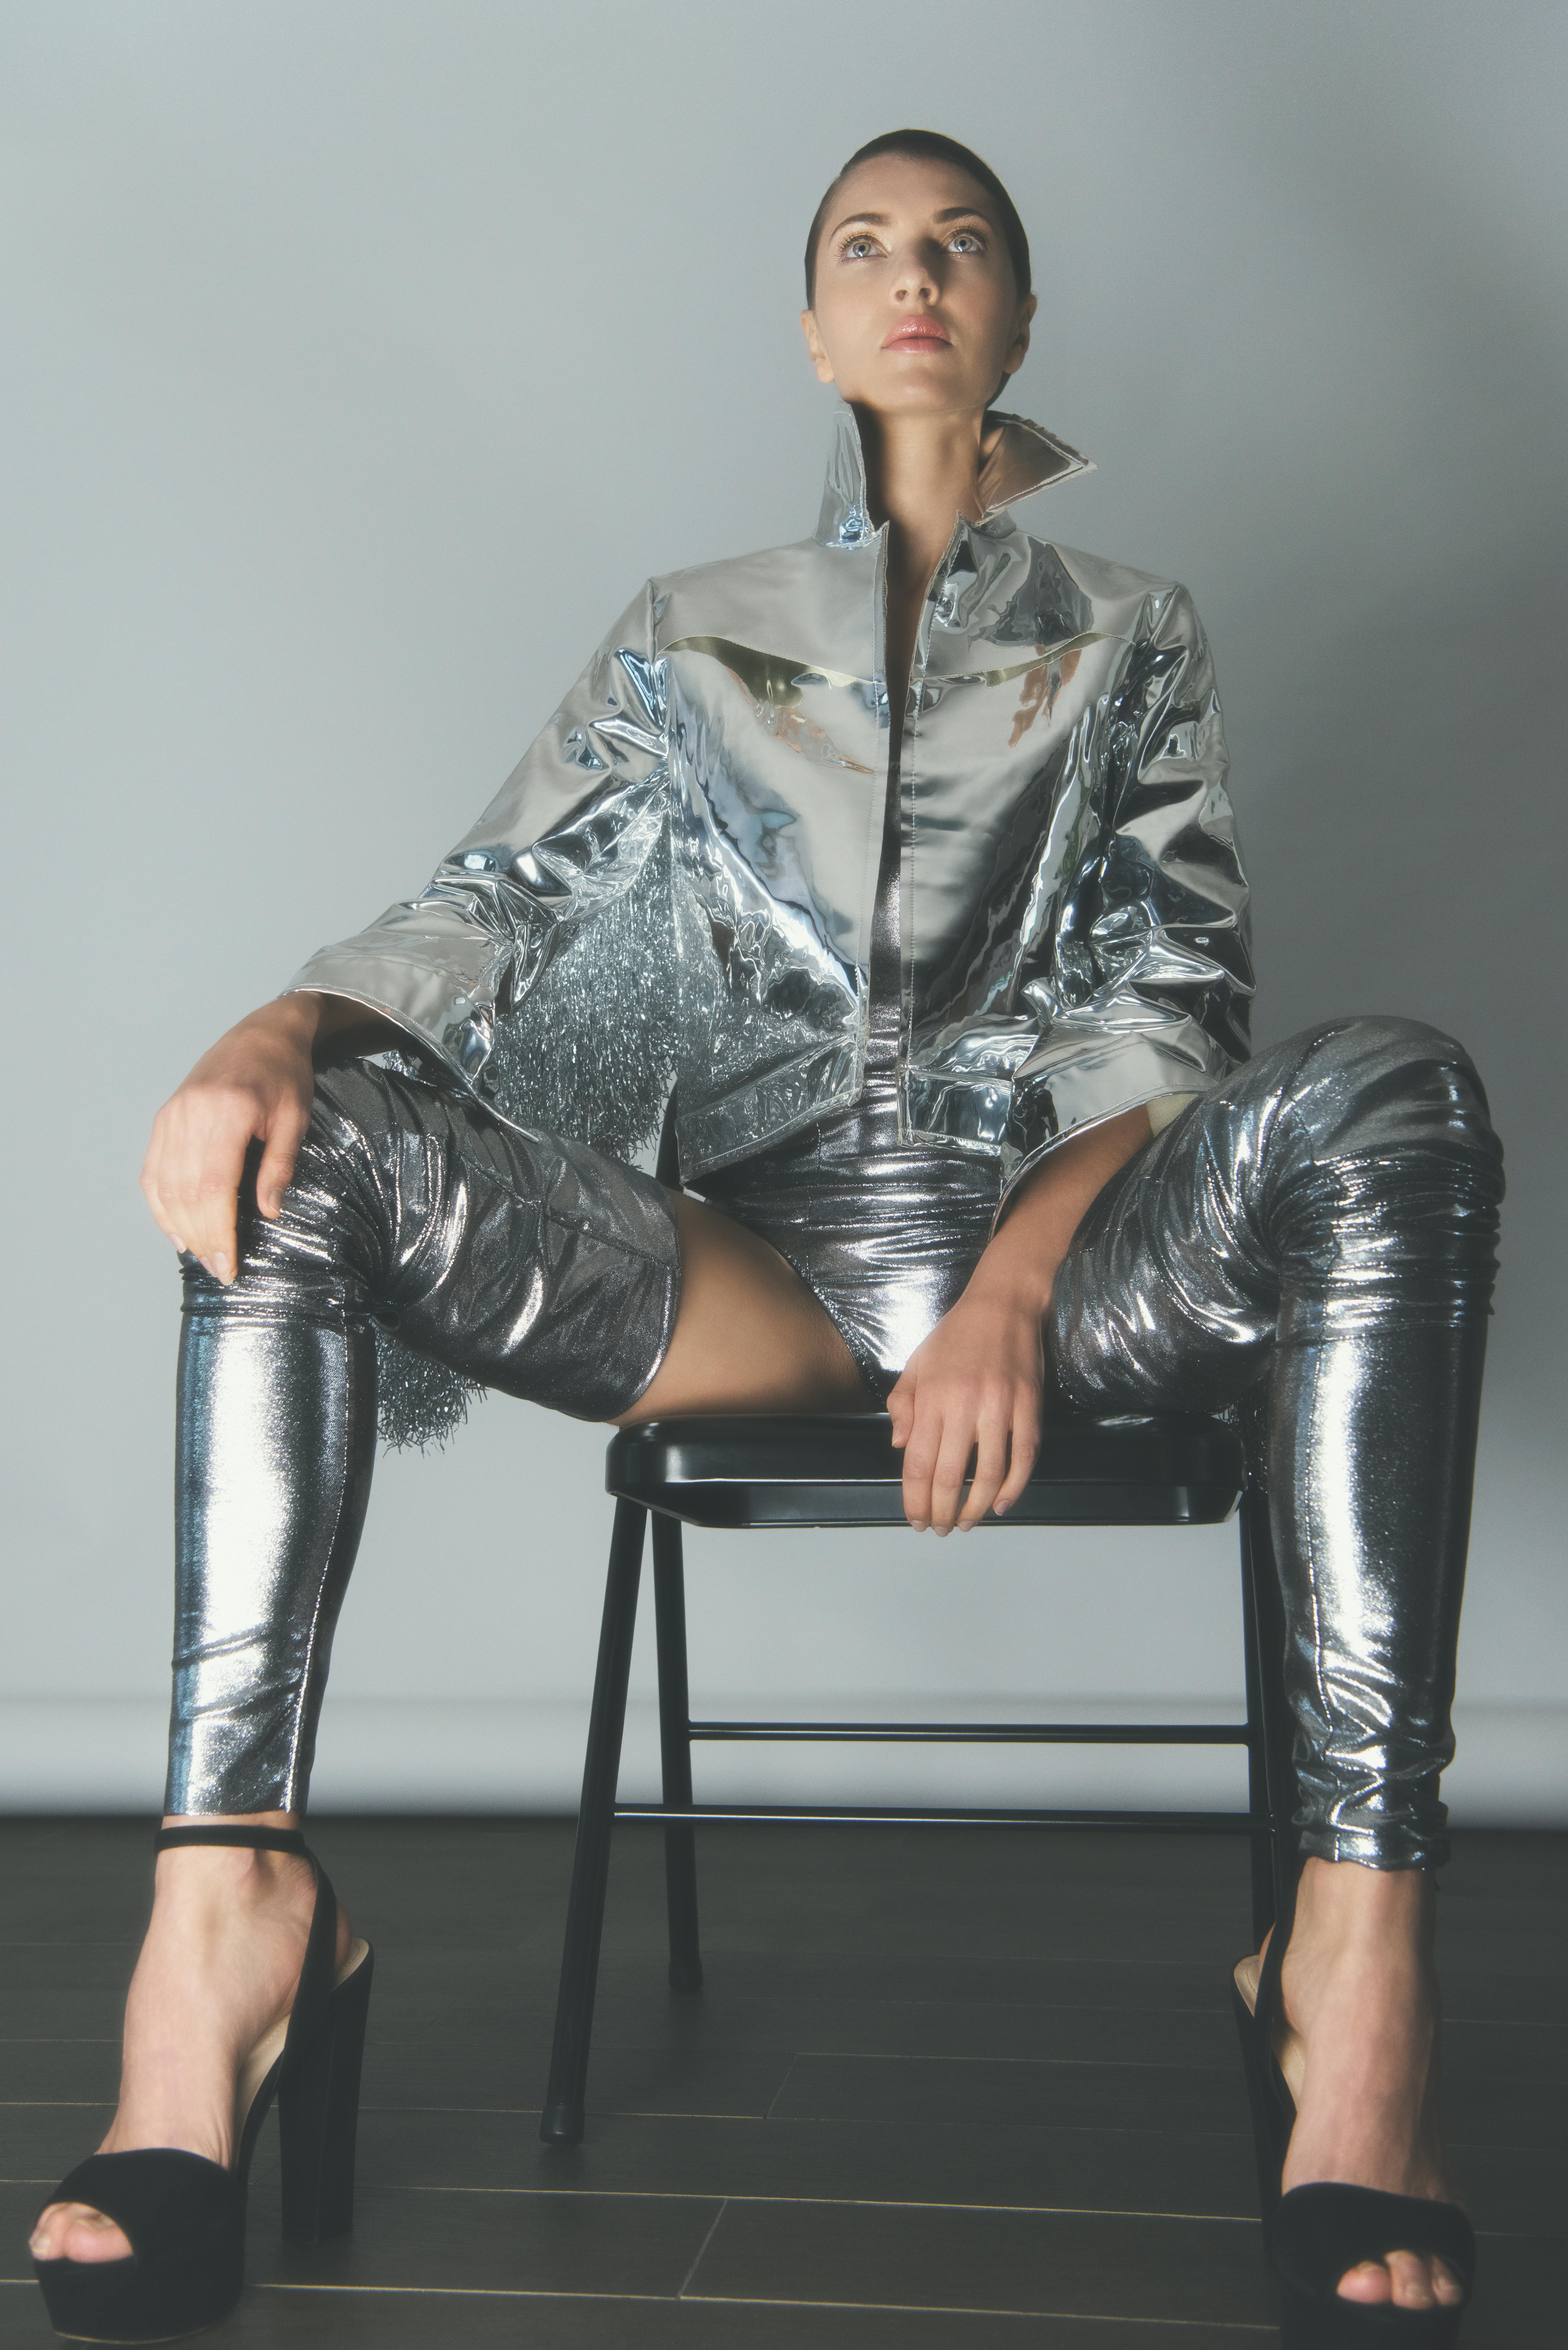 woman in silver outfit sitting on black chair